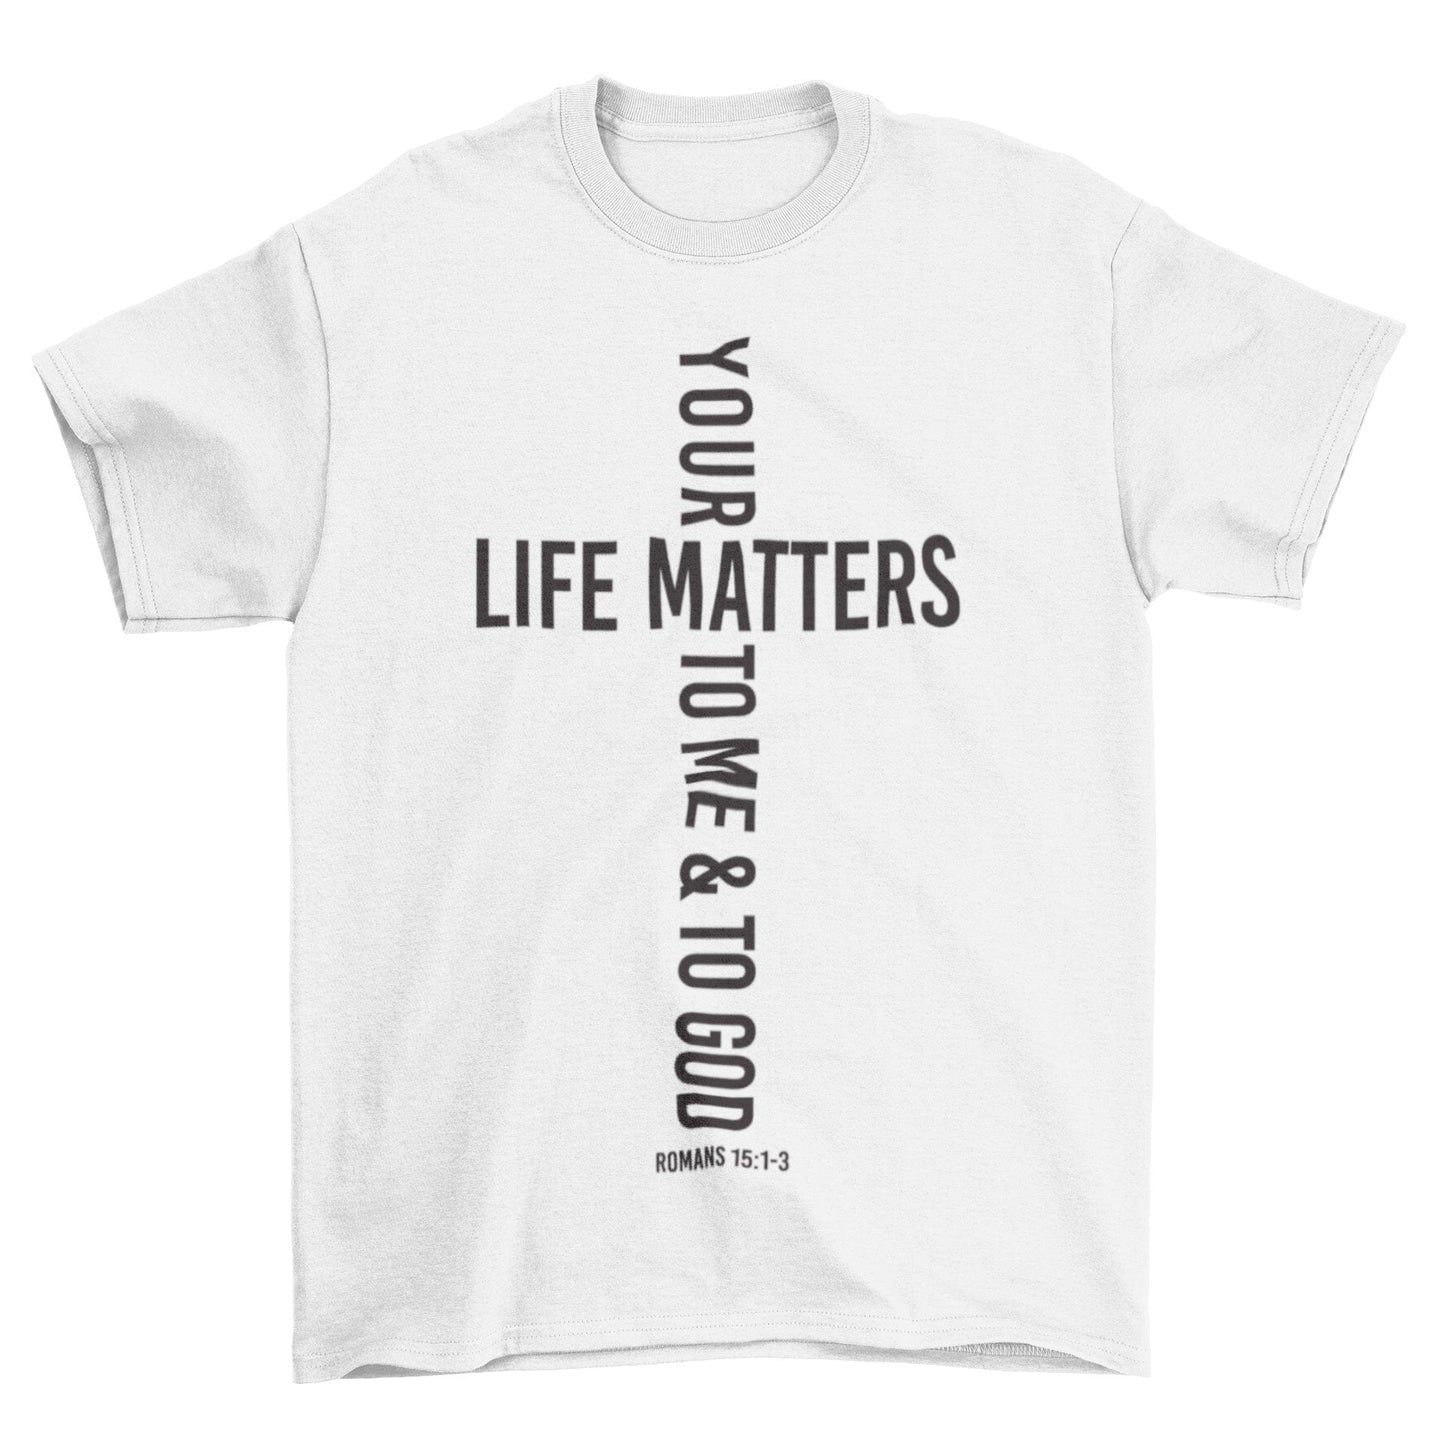 Wrighteous Wear T-Shirt S / White Your Life Matters Unisex Christian T-shirt